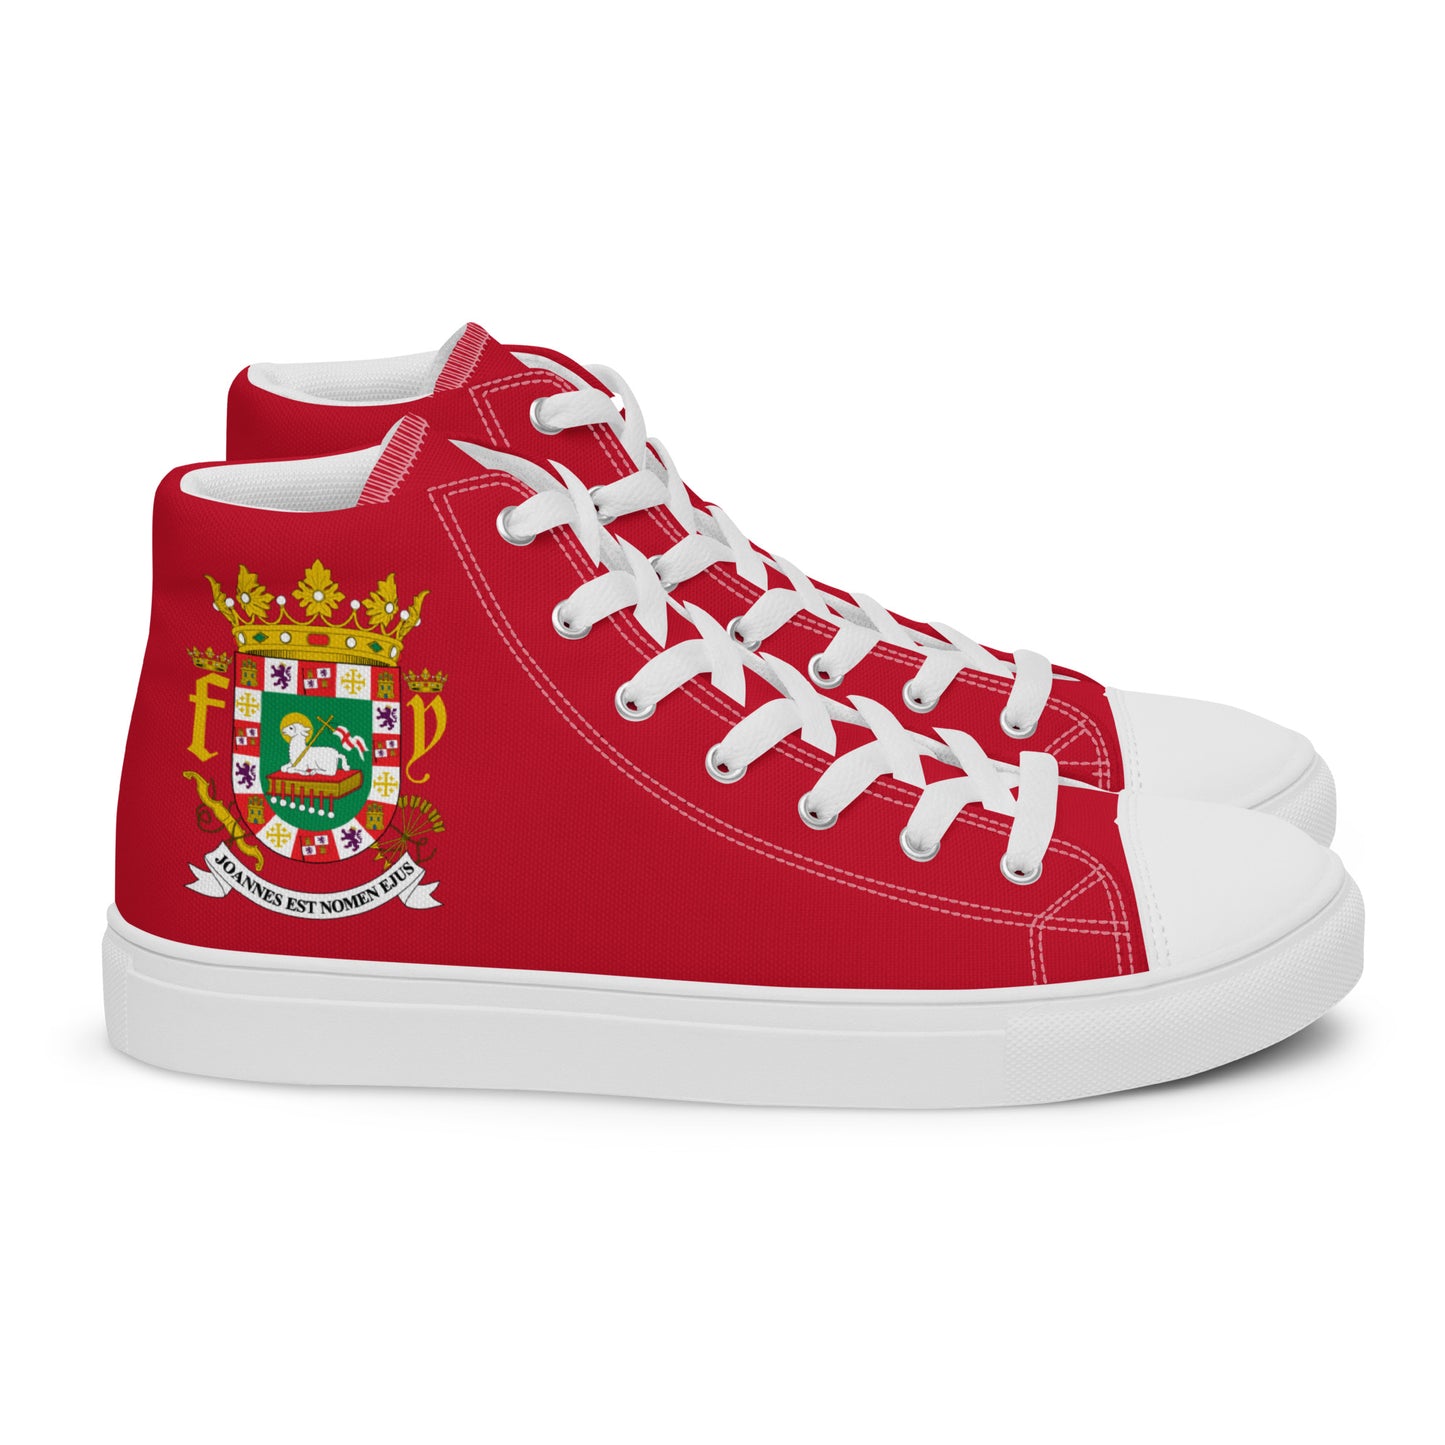 Puerto Rico - Women - Red - High top shoes